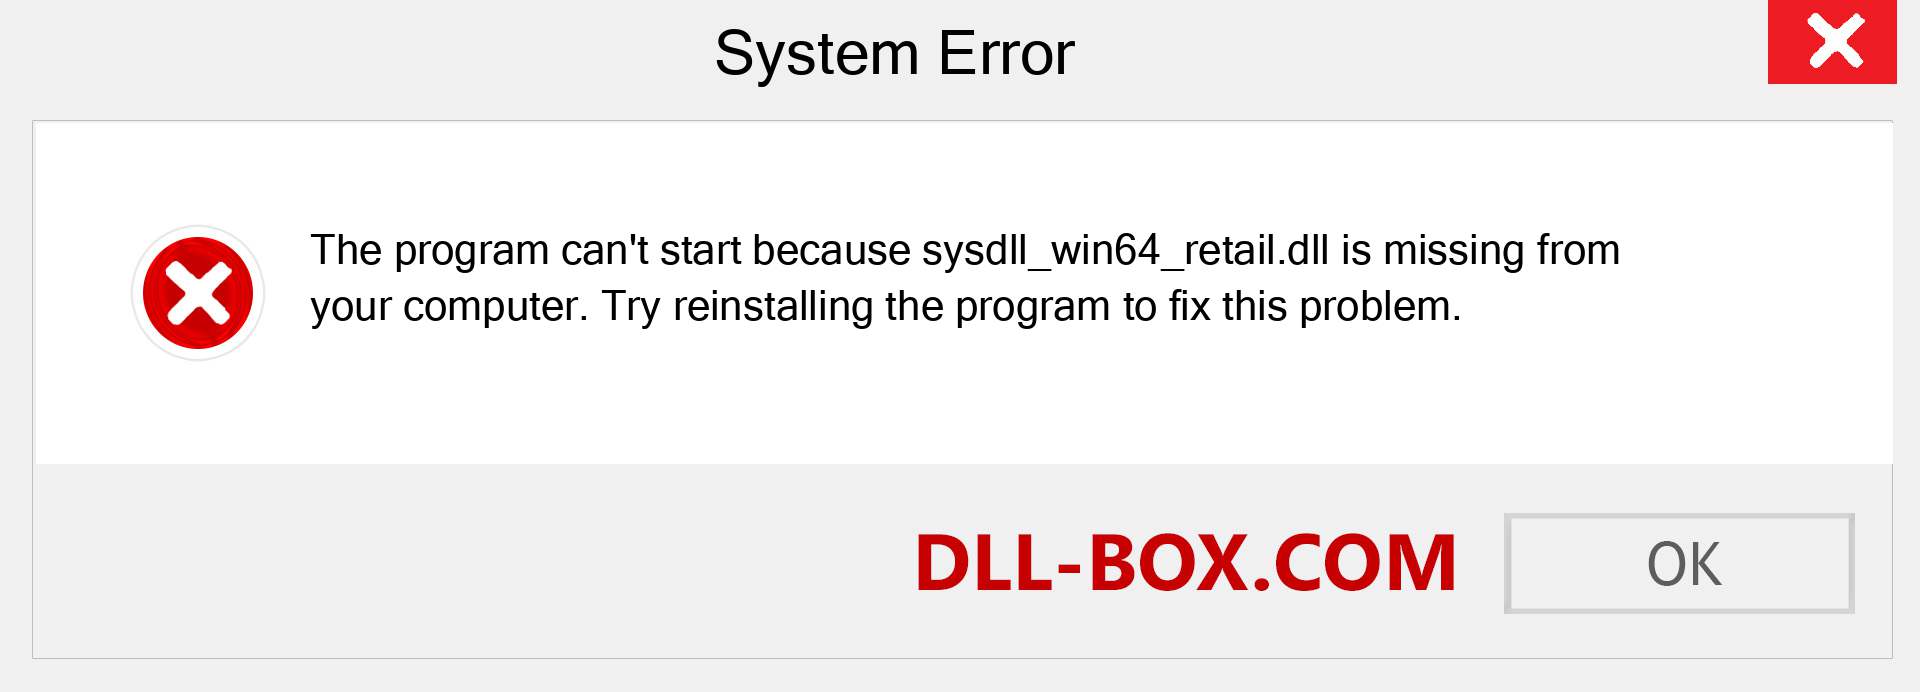  sysdll_win64_retail.dll file is missing?. Download for Windows 7, 8, 10 - Fix  sysdll_win64_retail dll Missing Error on Windows, photos, images